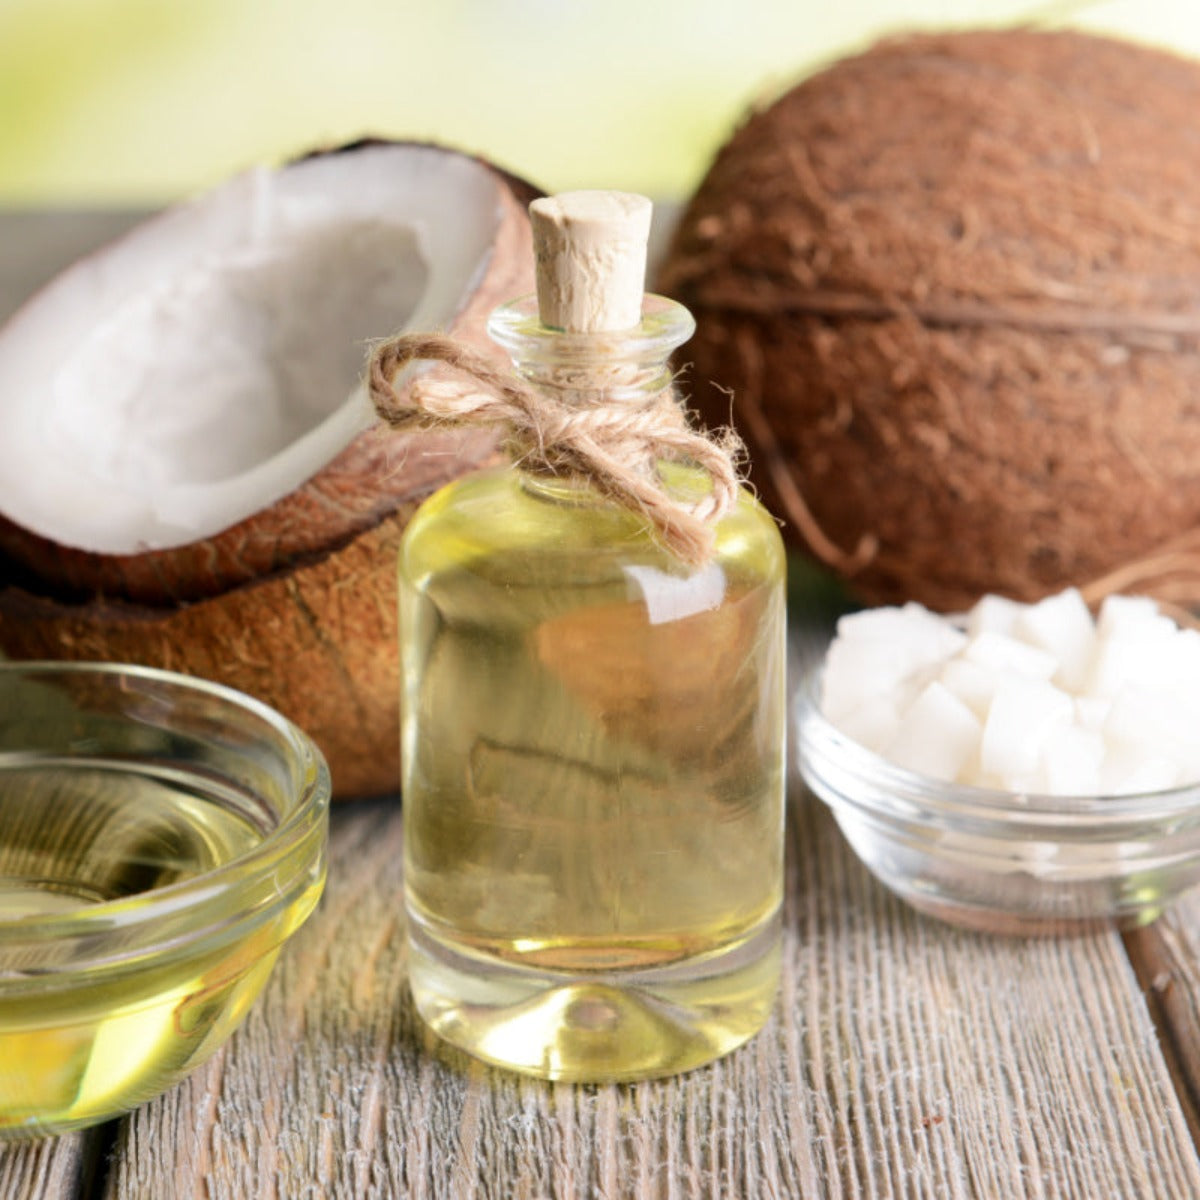 Bottle of coconut oil amidst sliced and whole coconuts, symbolizing a key ingredient in shea butter soap, capturing natural essence